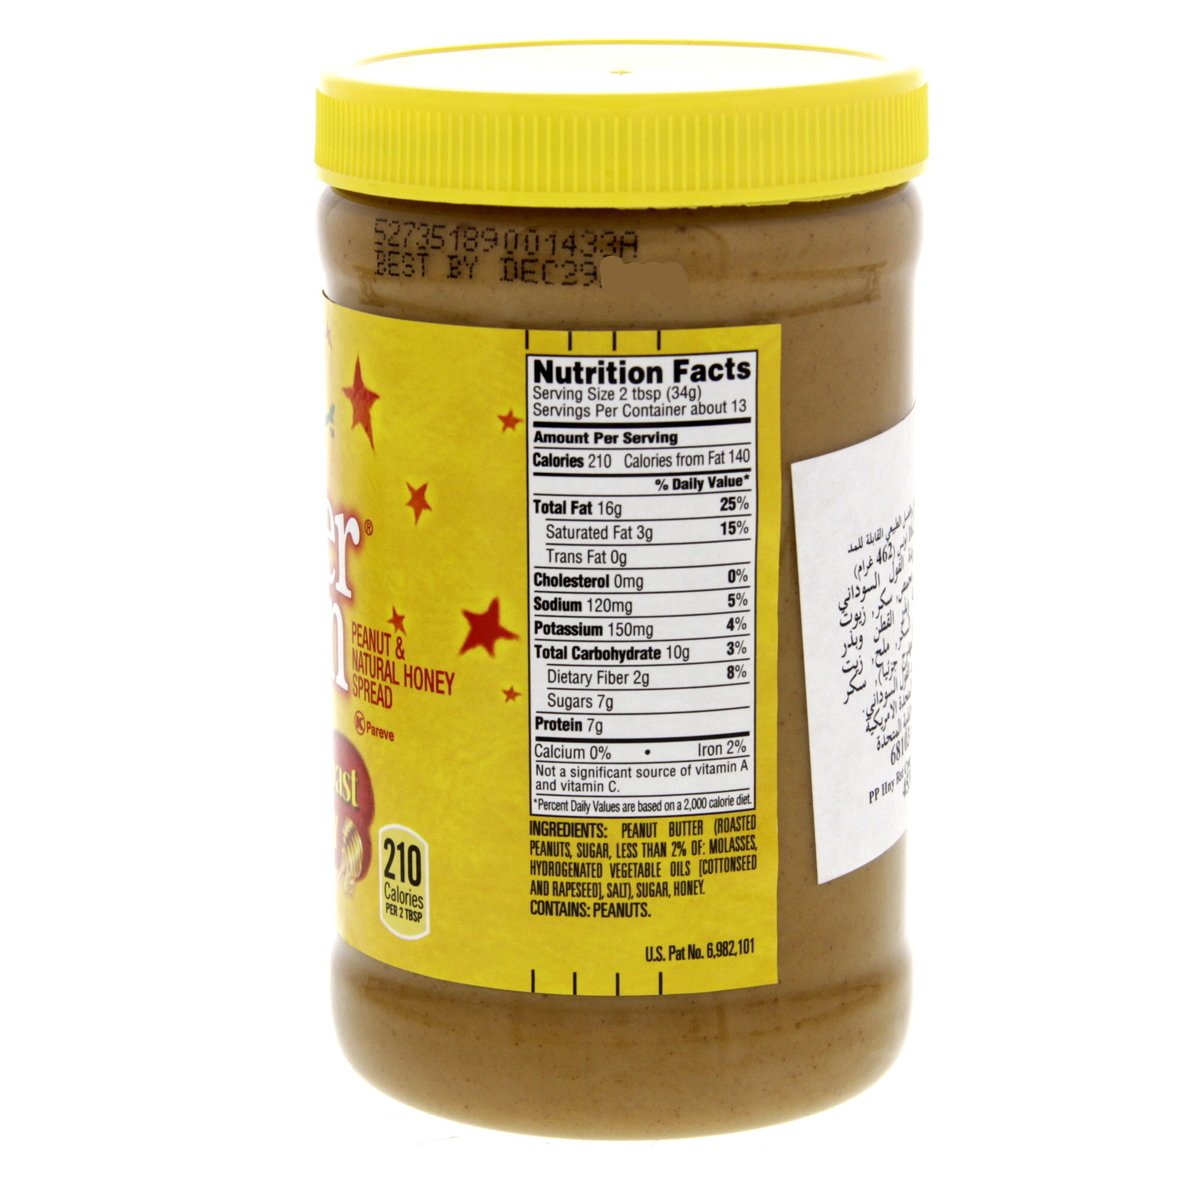 Peter Pan Peanut And Natural Honey Spread Creamy 462 g